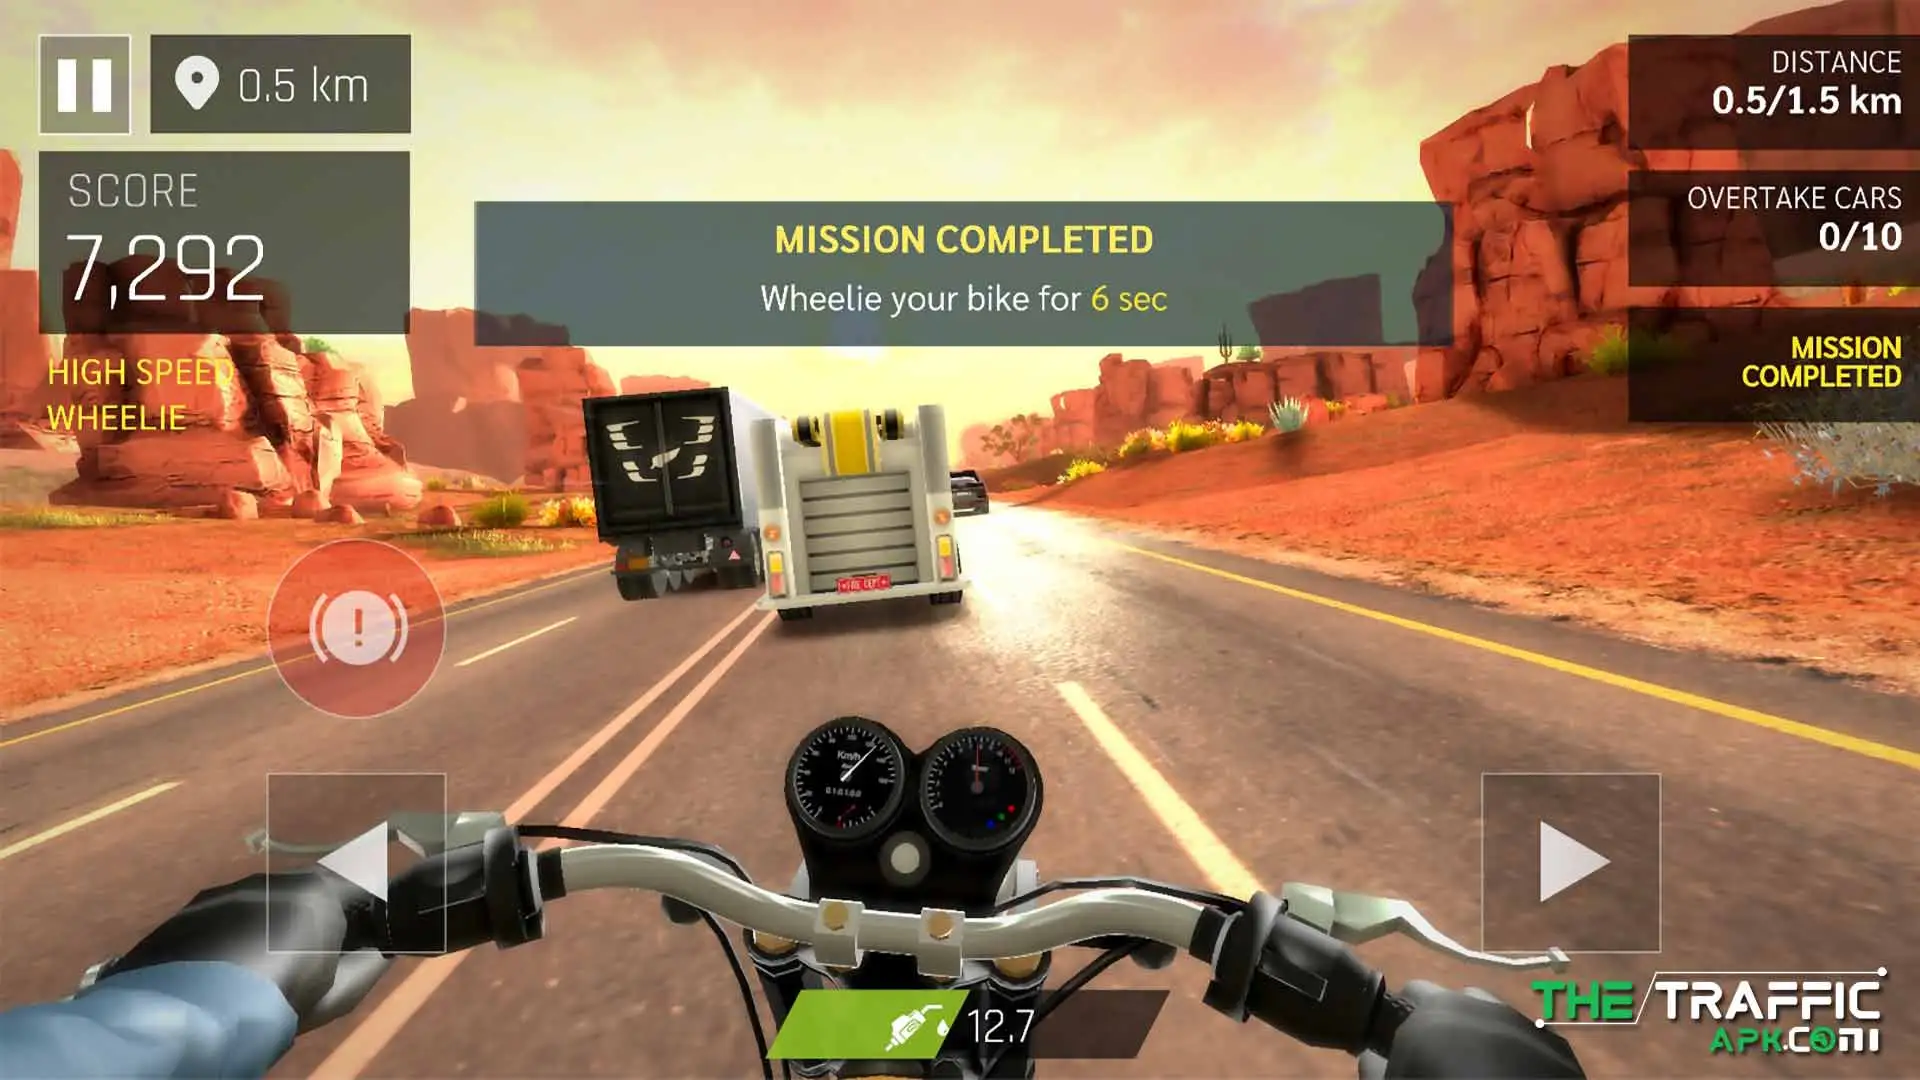 First-person camera view